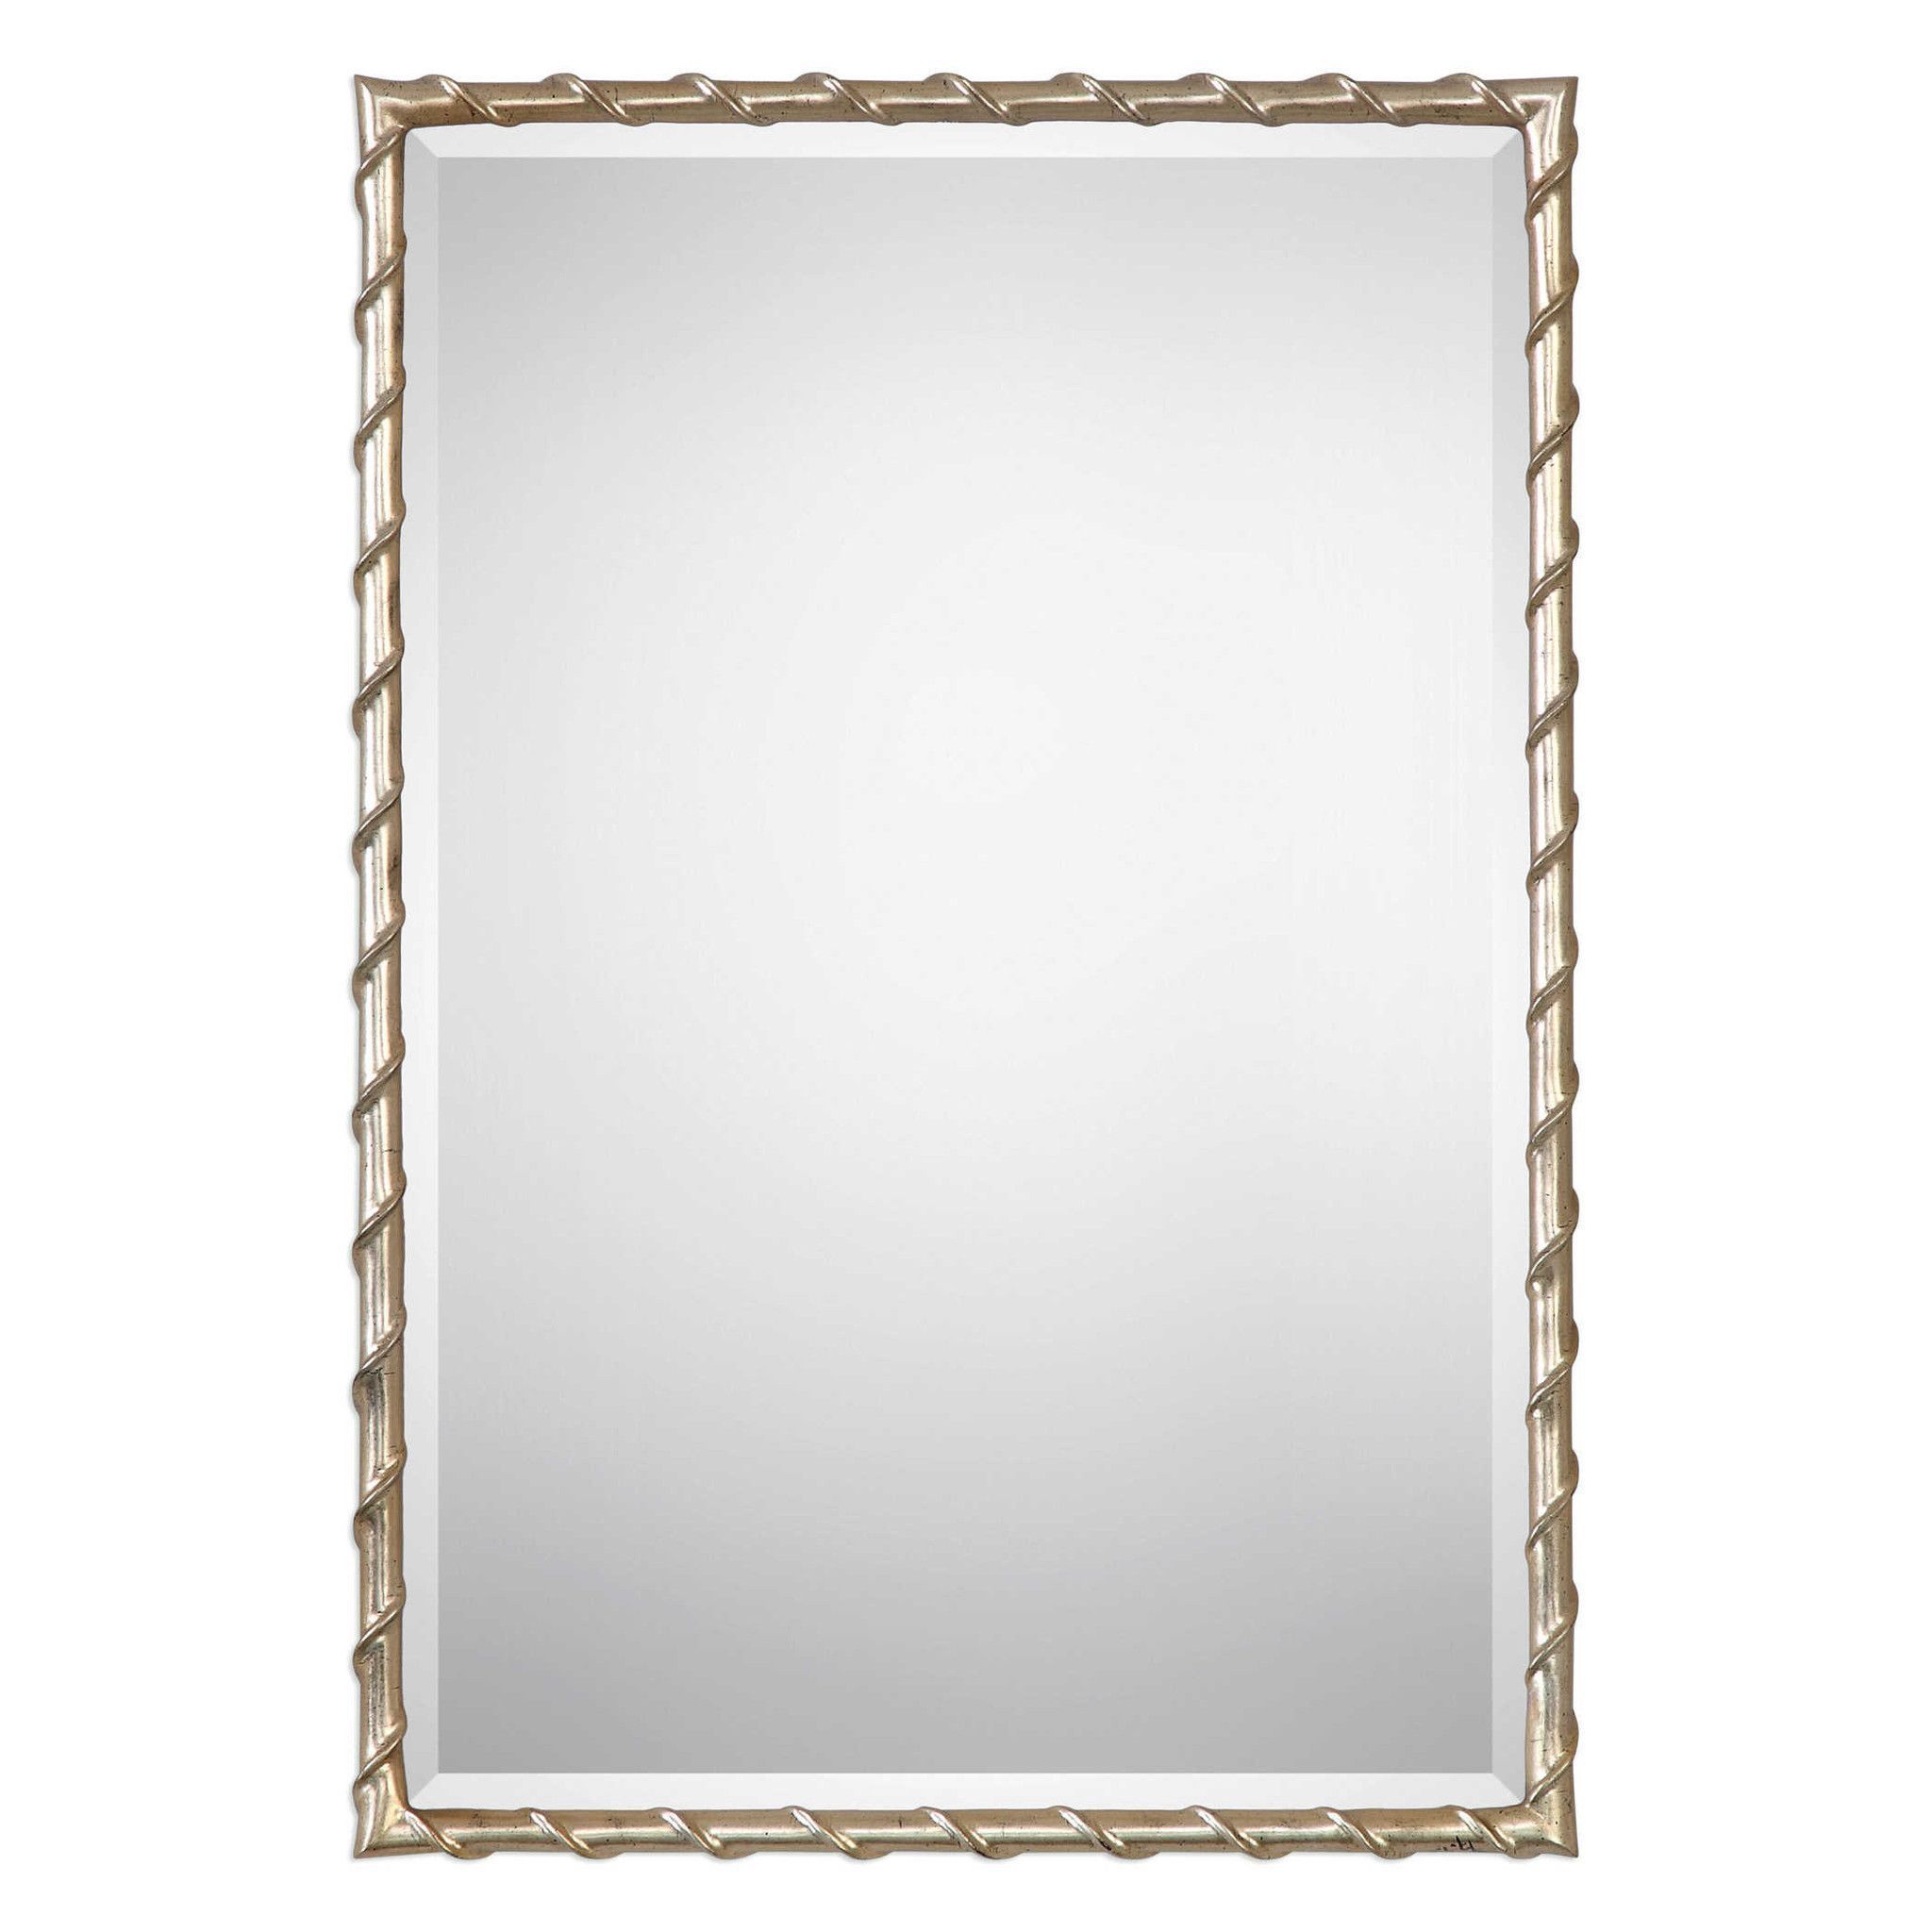 Uttermost Laden Silver Mirror | Mirror Wall, Framed Mirror Wall, Silver Inside Silver Metal Cut Edge Wall Mirrors (View 4 of 15)